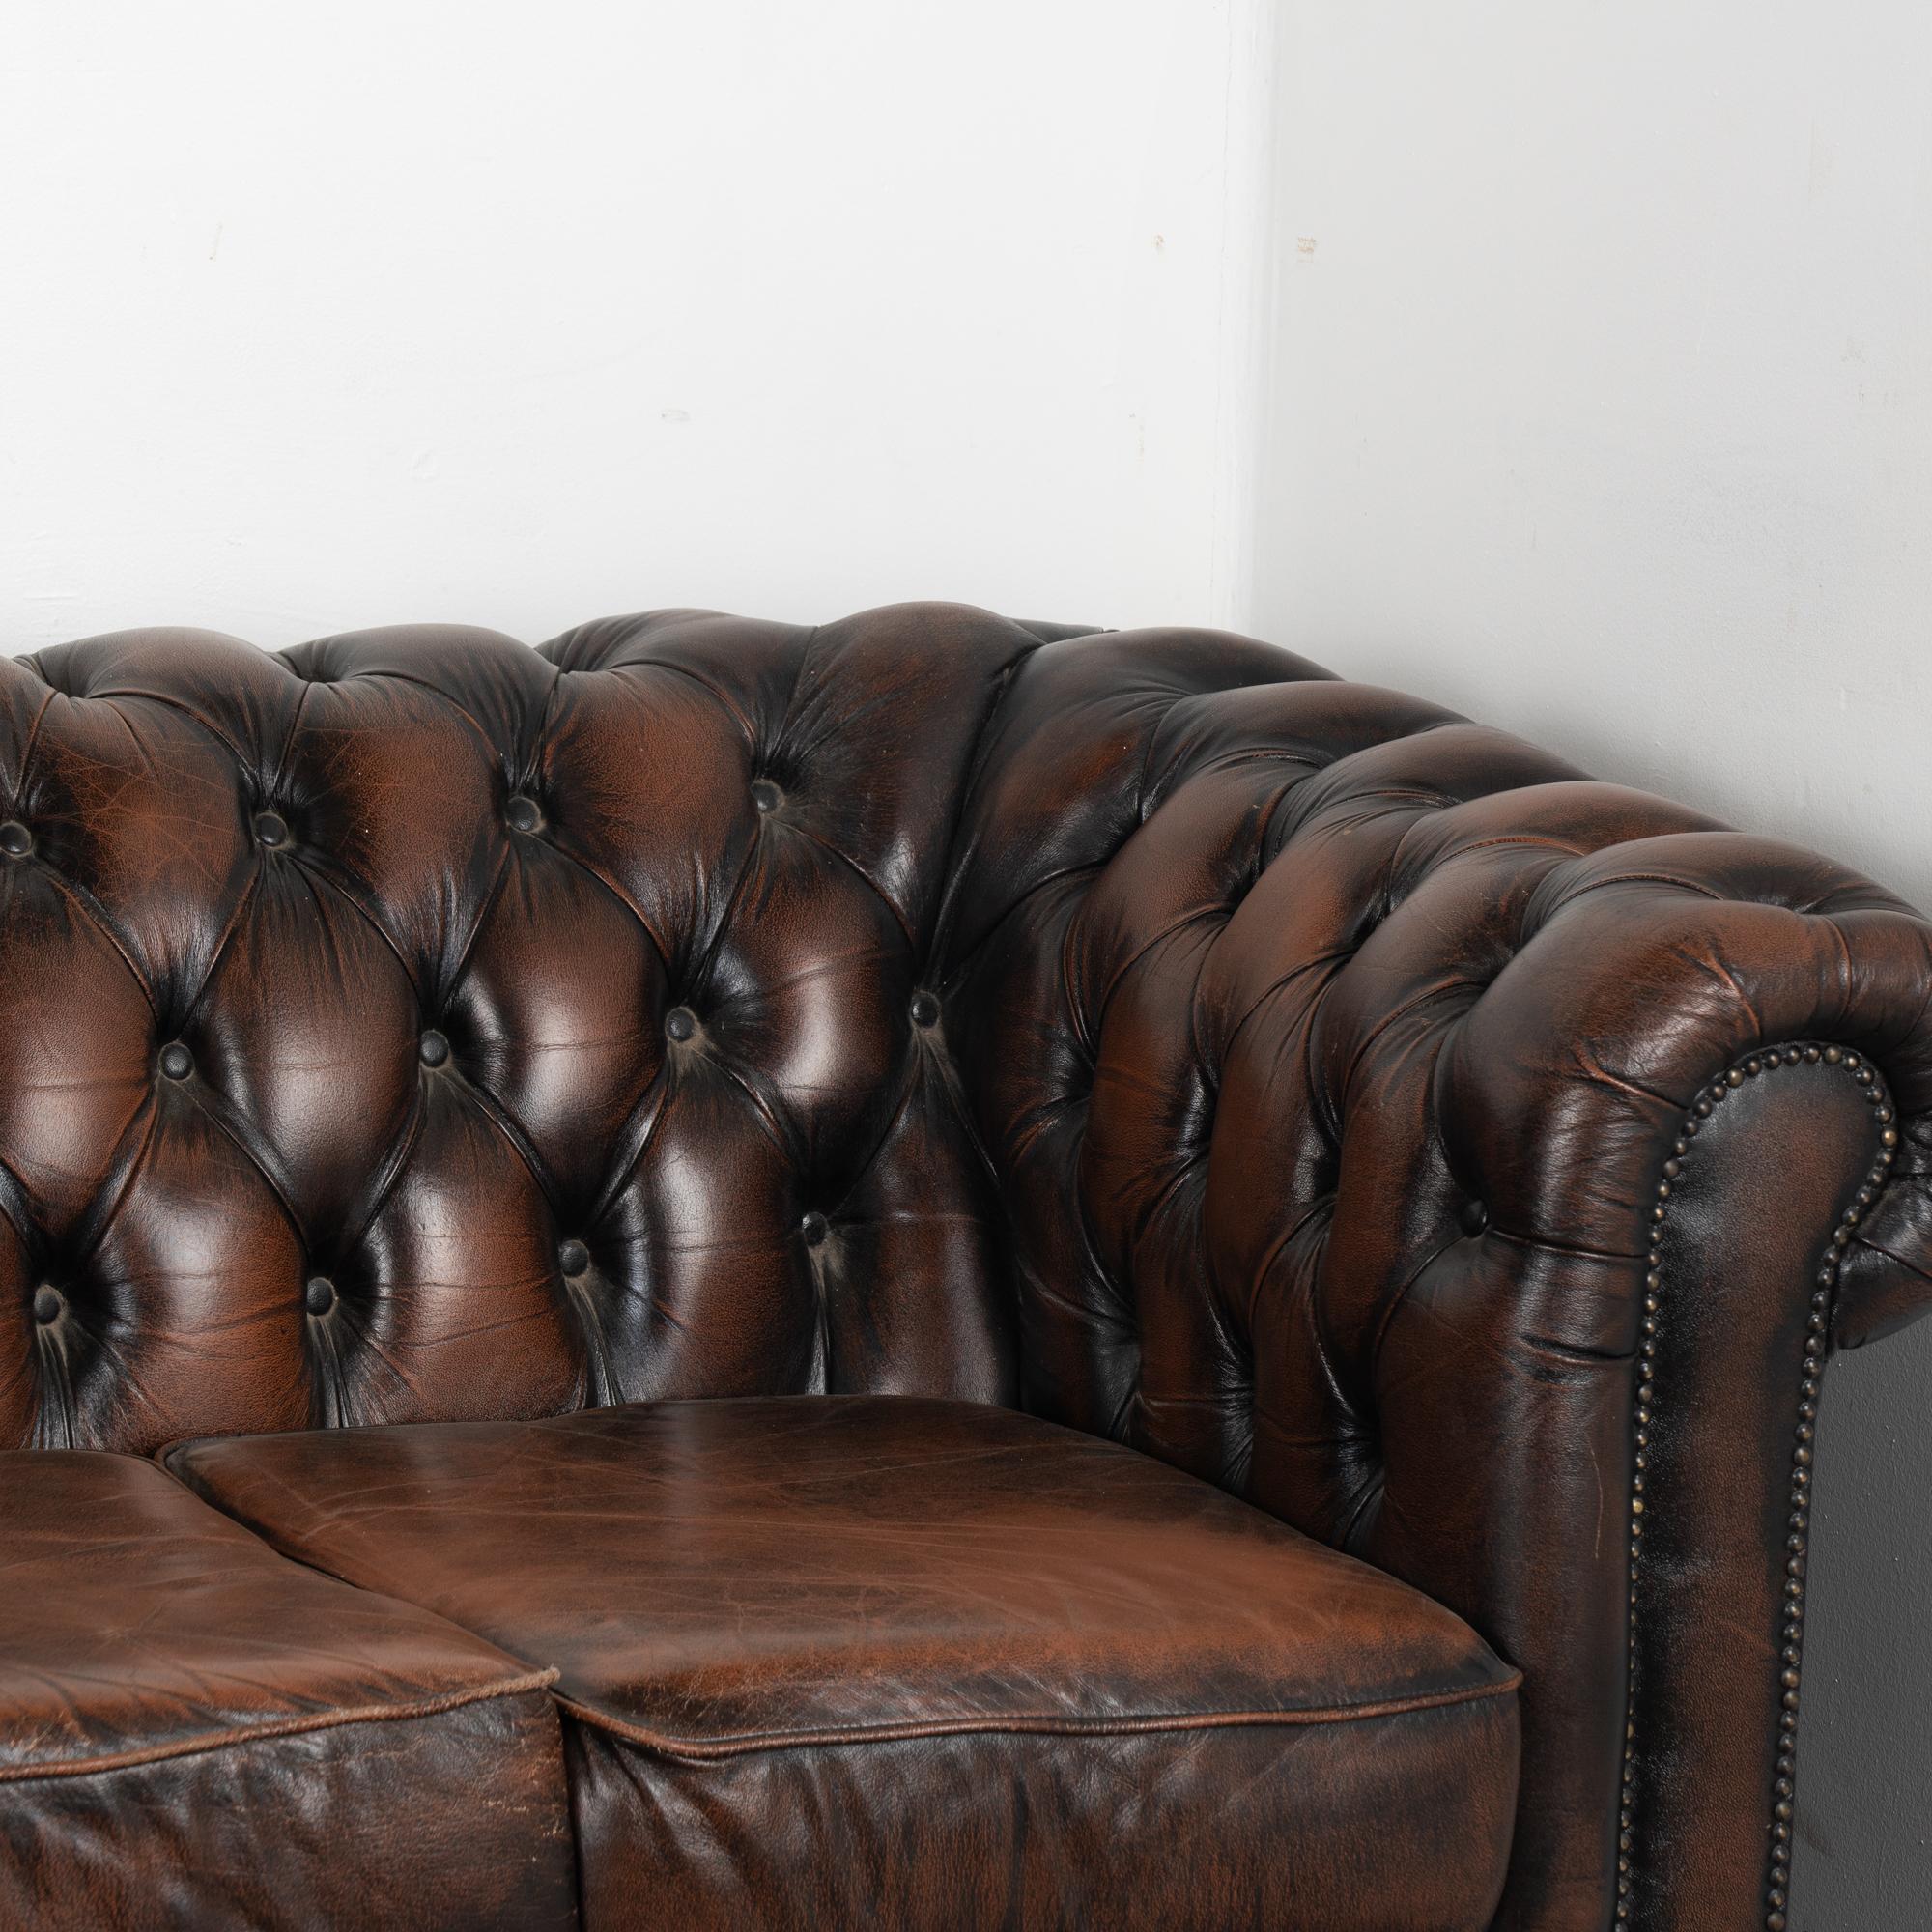 Vintage Brown Leather Chesterfield 3 Seat and 2 Seat Sofa Set, circa 1970-80 3